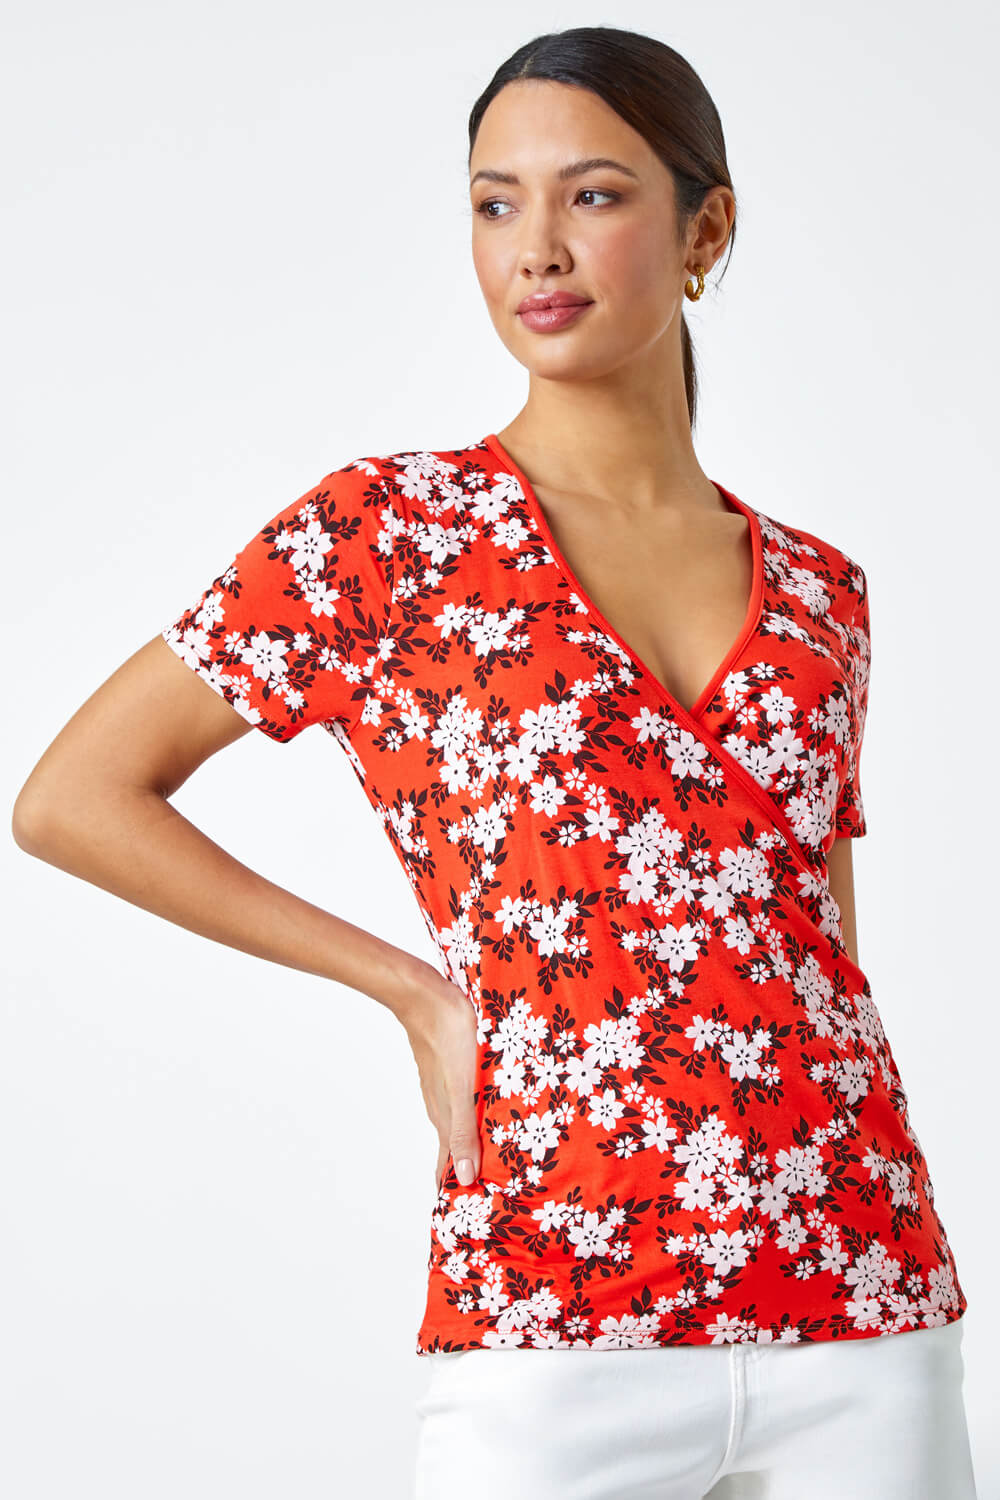 Red Floral Print Wrap Stretch Top, Image 4 of 5